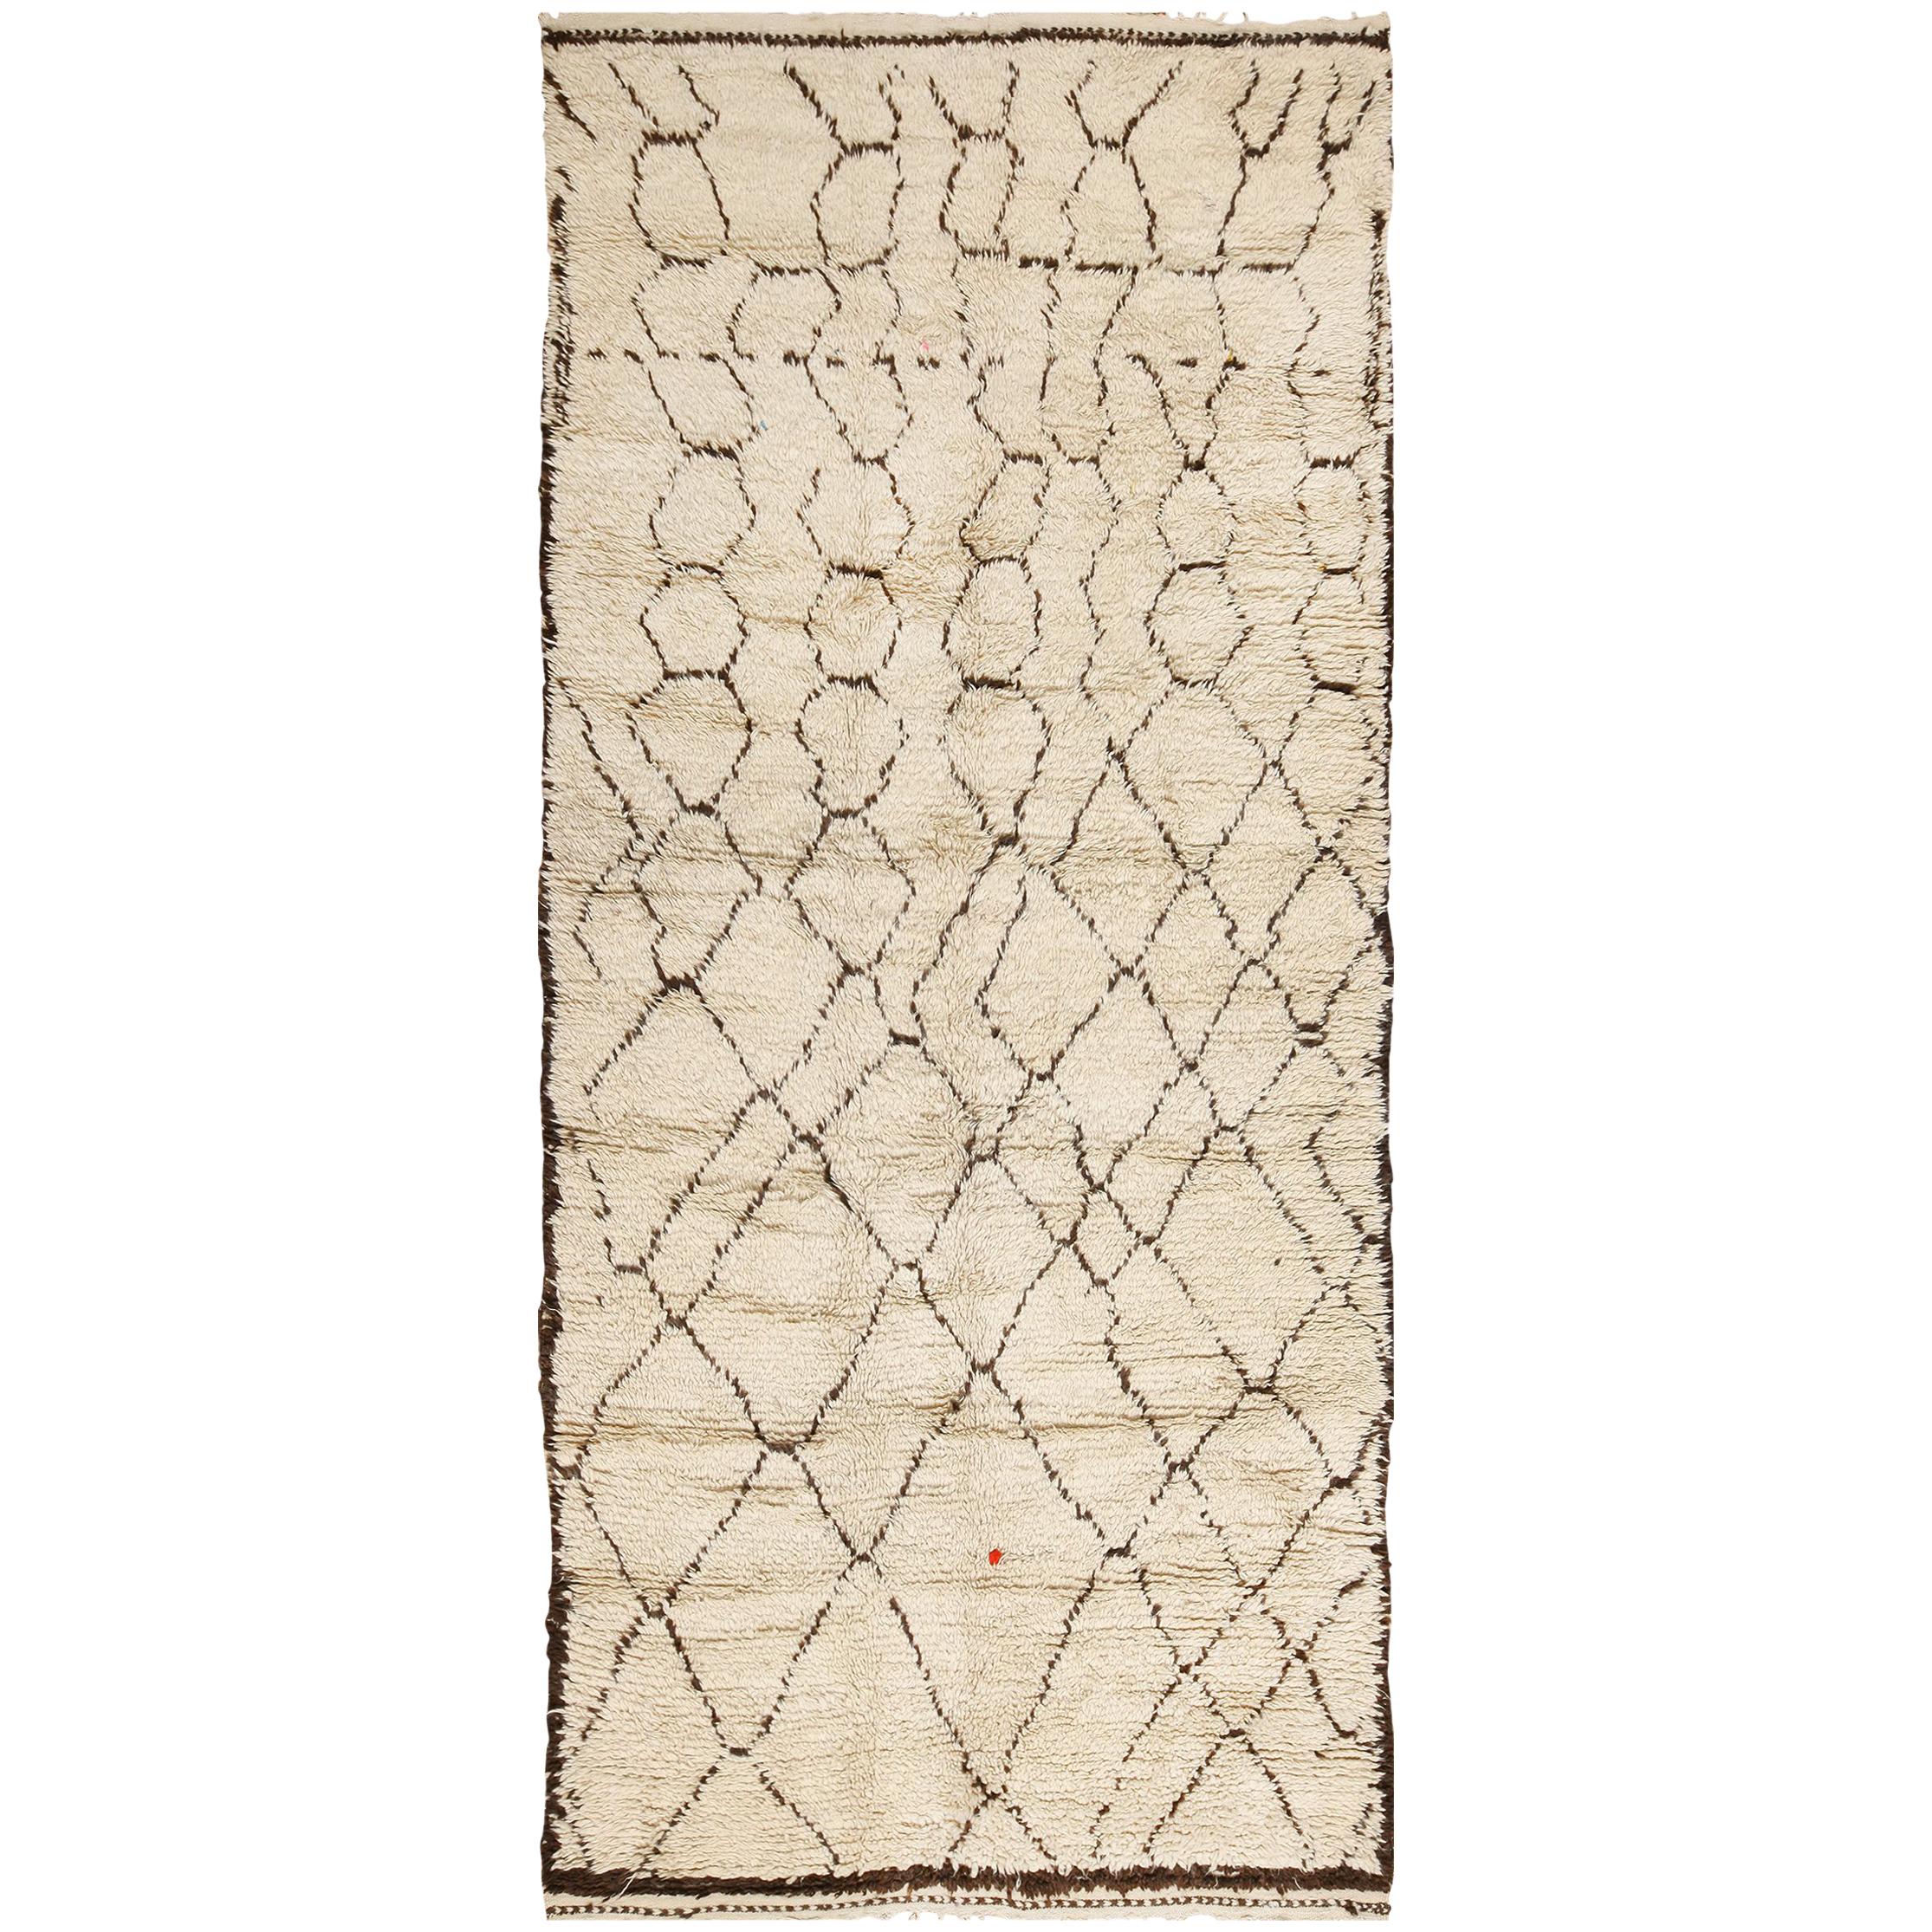 Shag Ivory Vintage Beni Ourain Moroccan Rug. Size: 4 ft 10 in x 11 ft 2 in